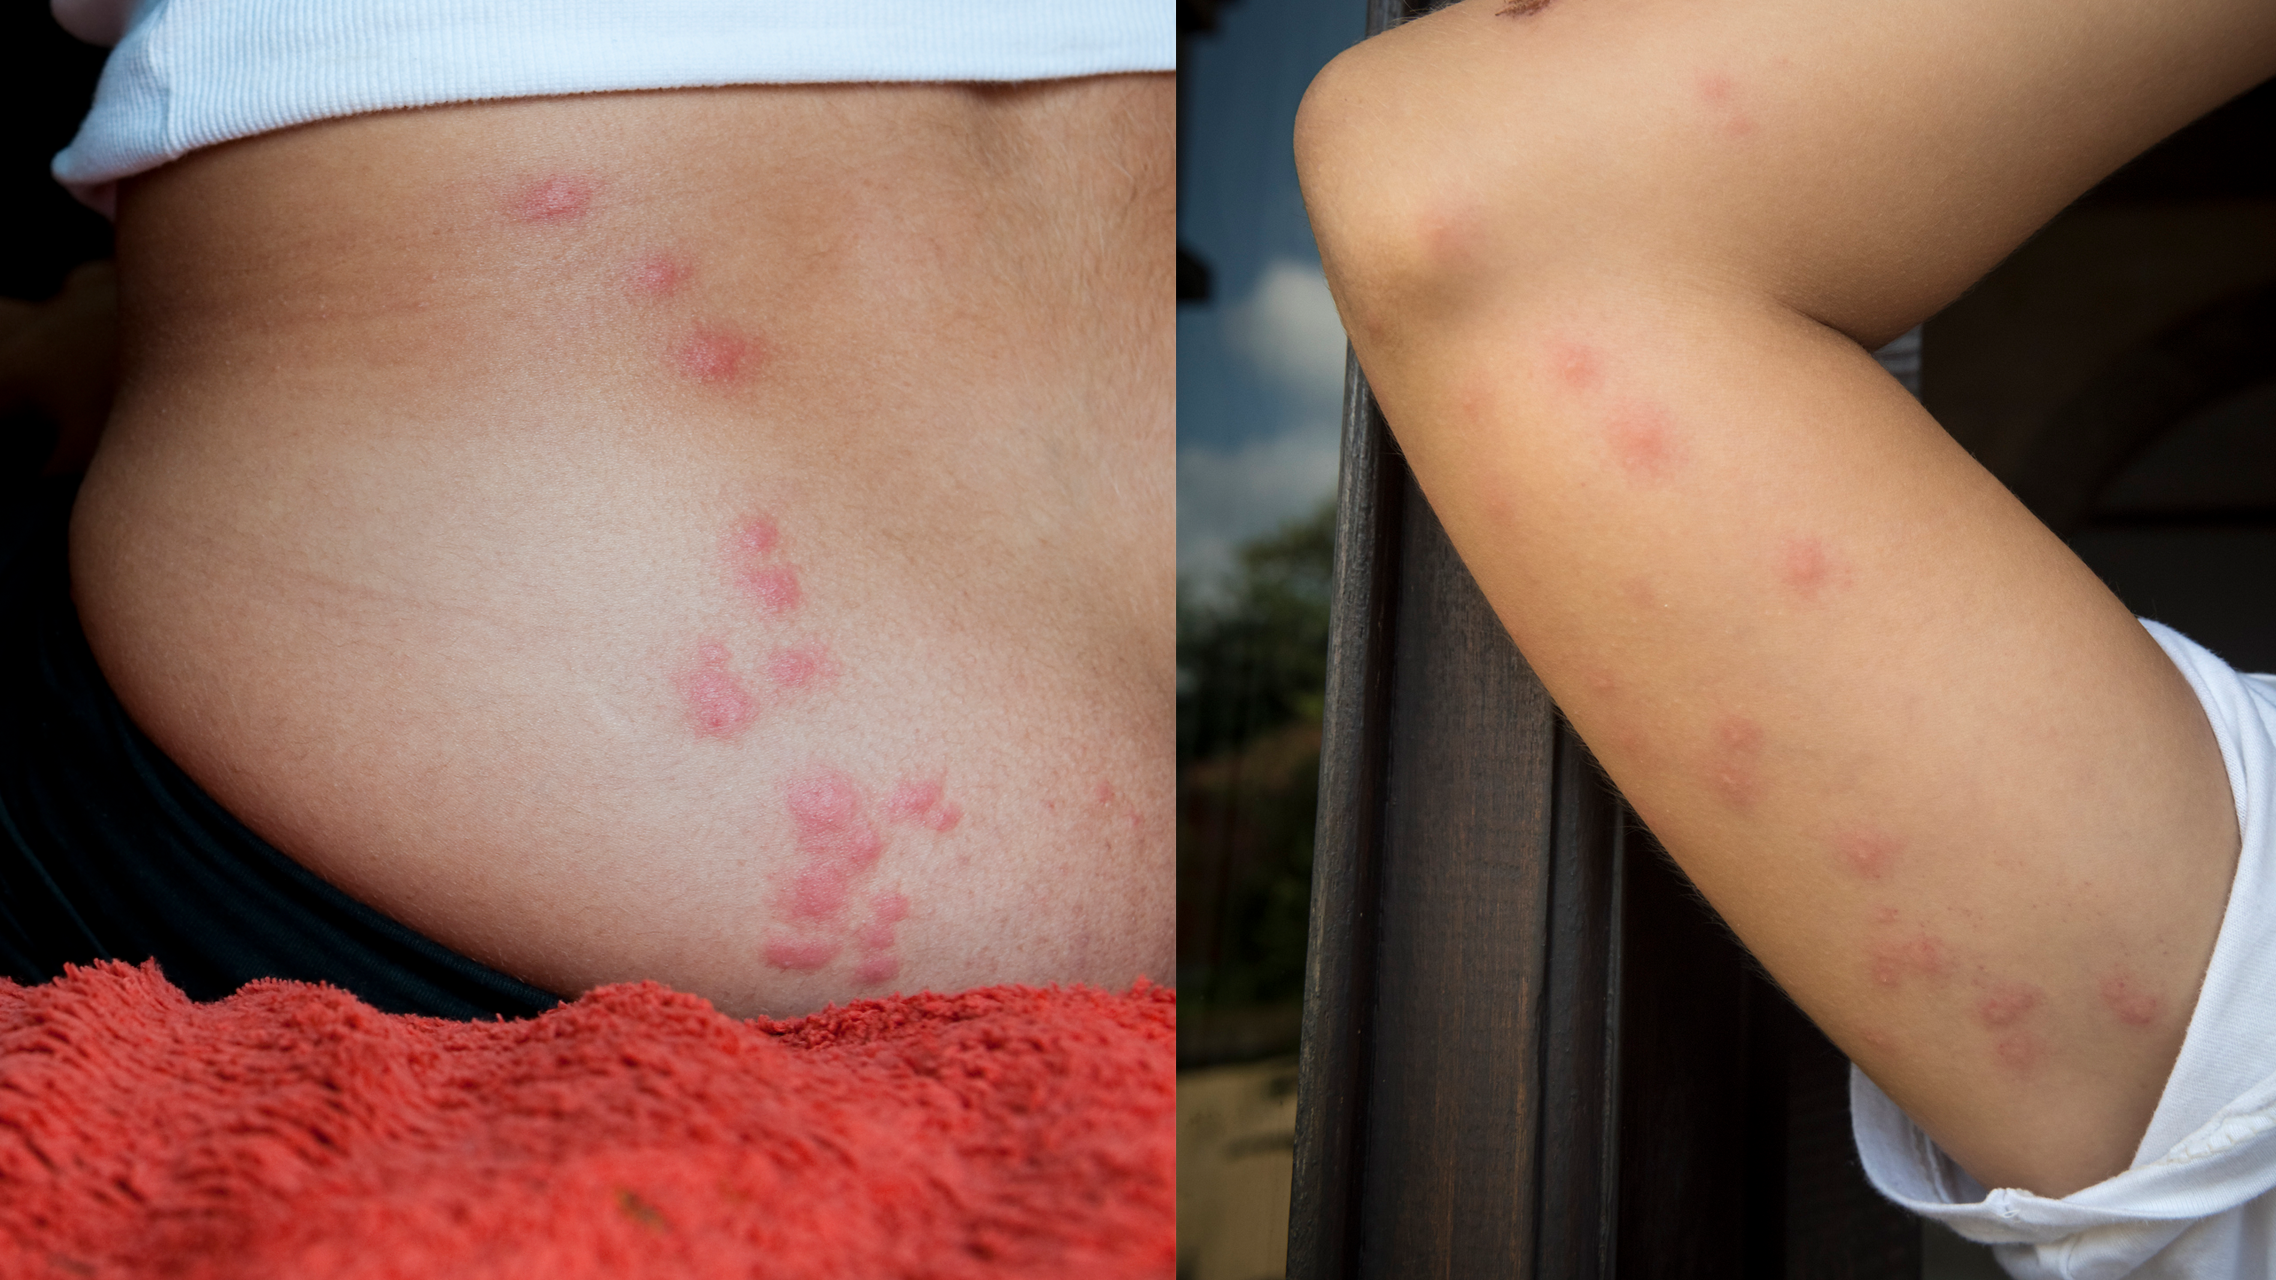 The best bug bite relief products, according to experts